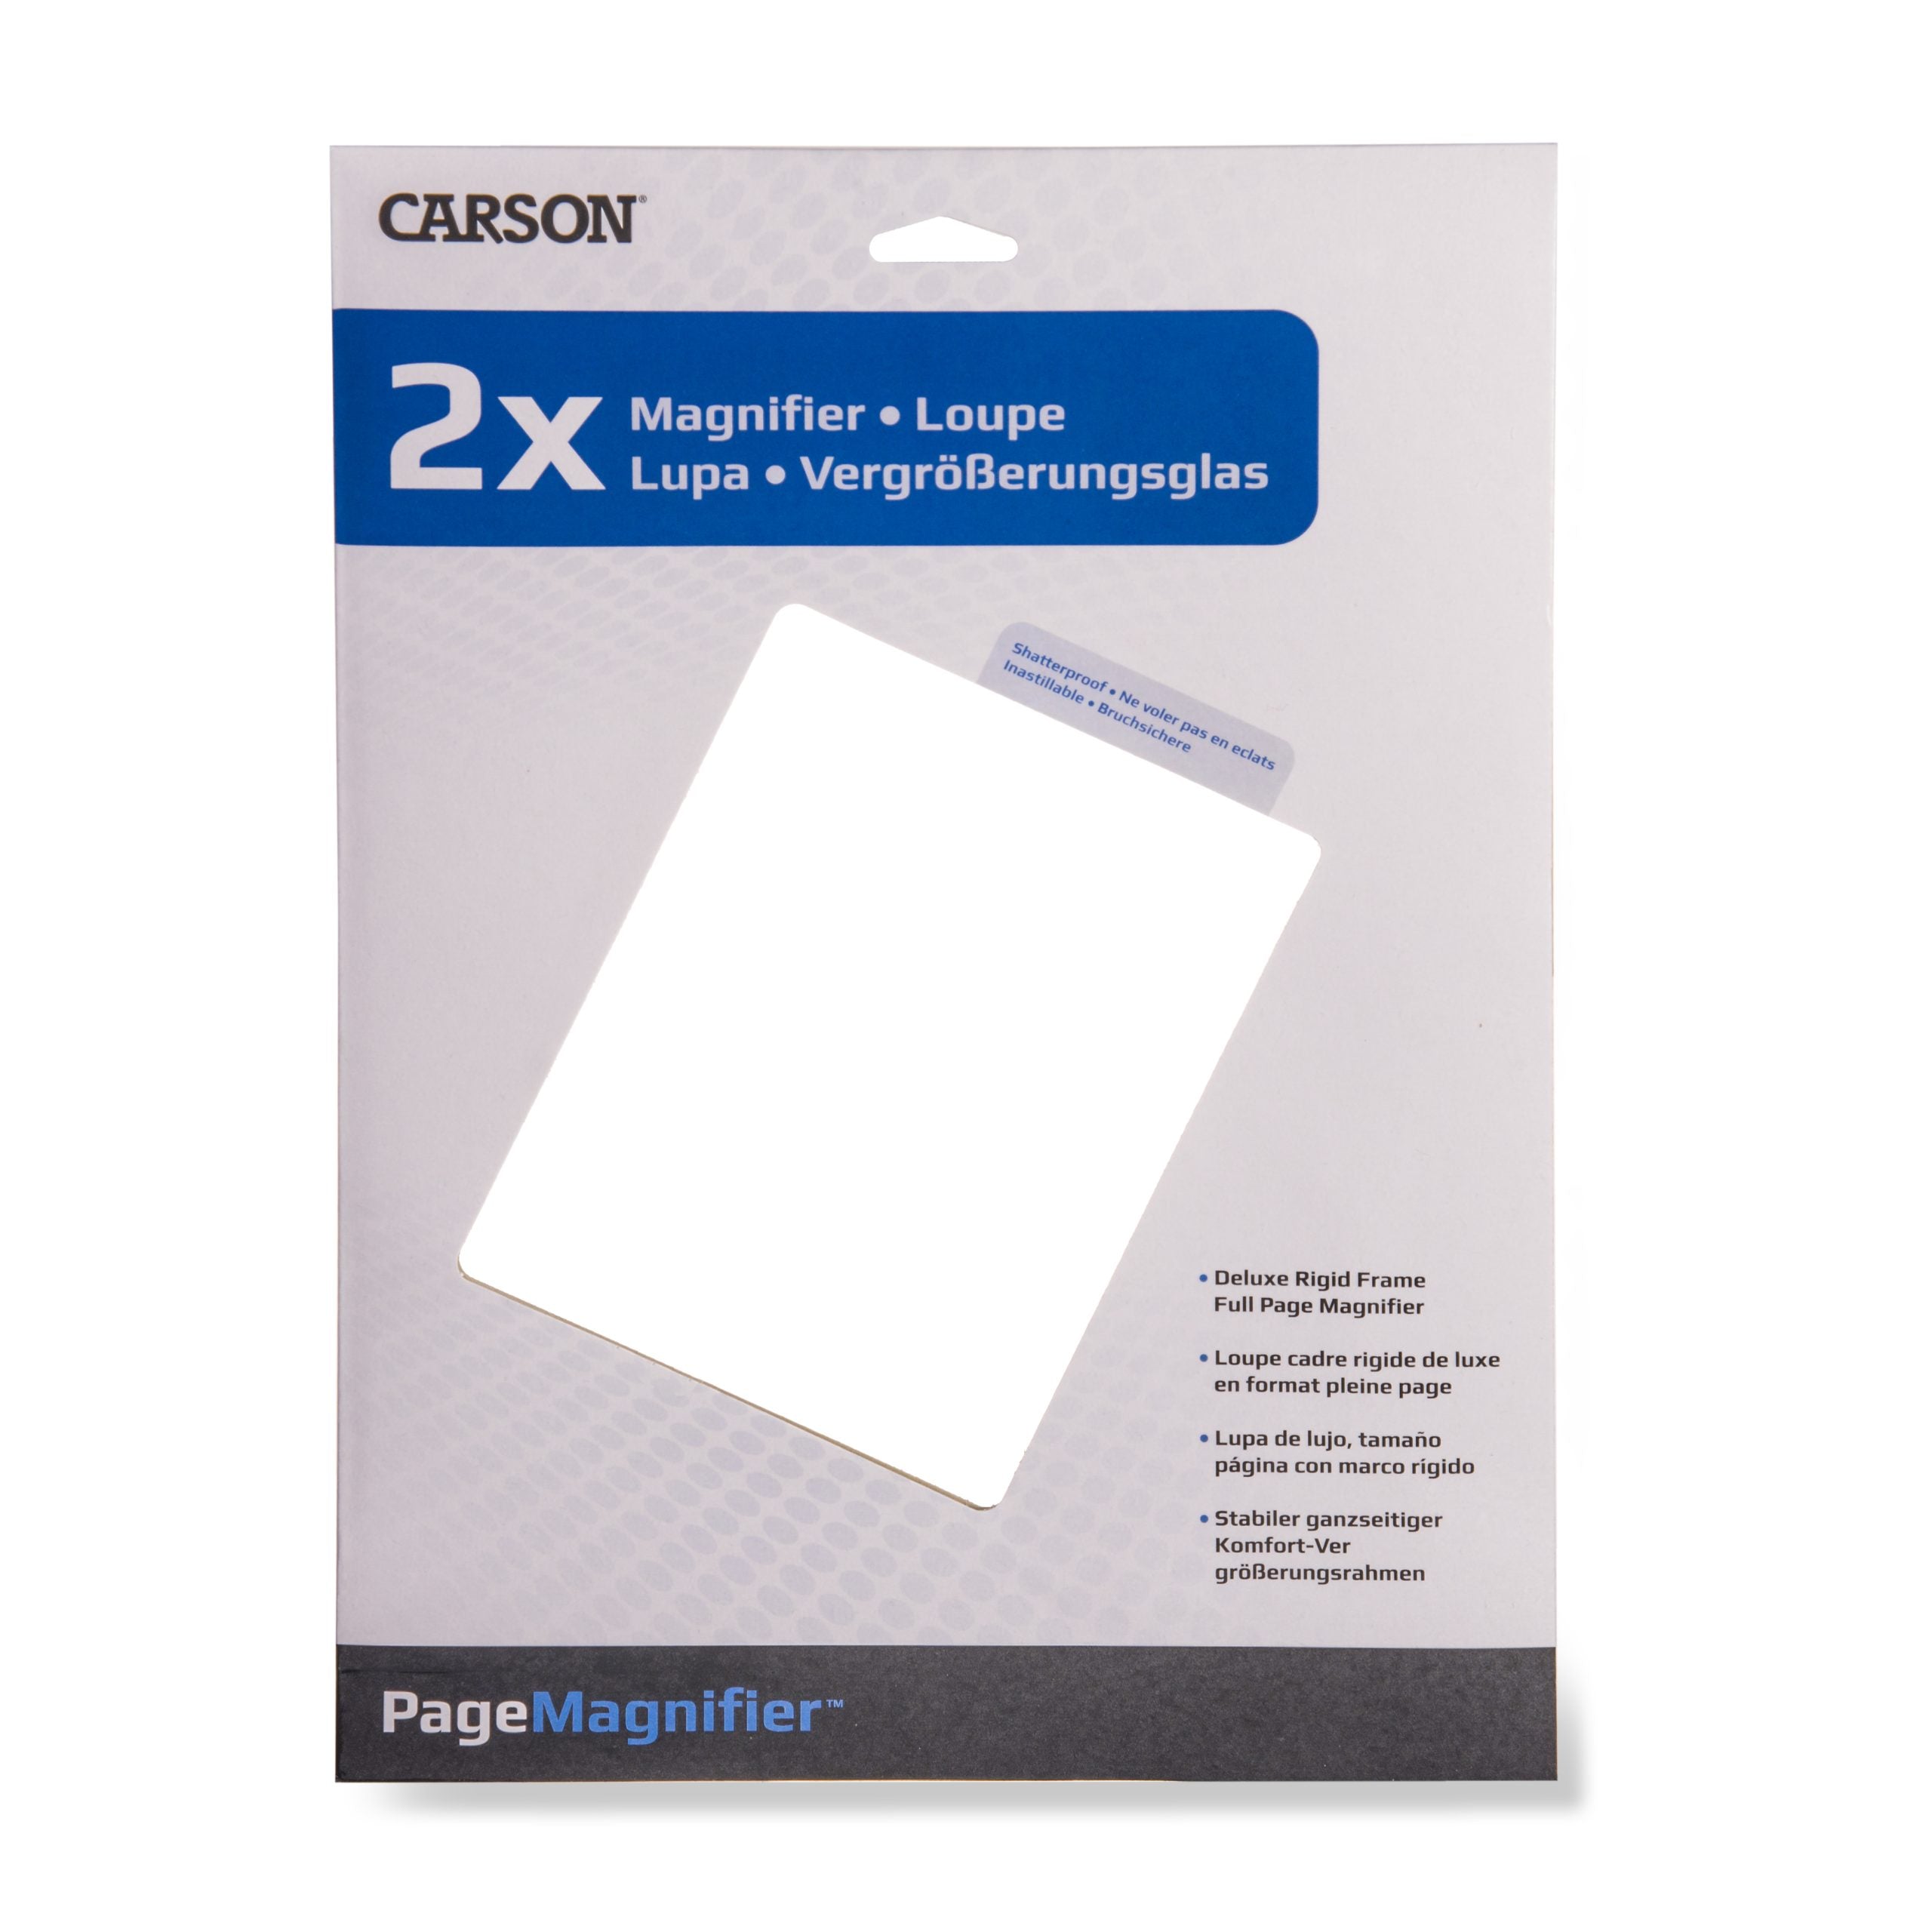 2x Magnification Rigid Frame 8.5×11 Inch Full Page Magnifier